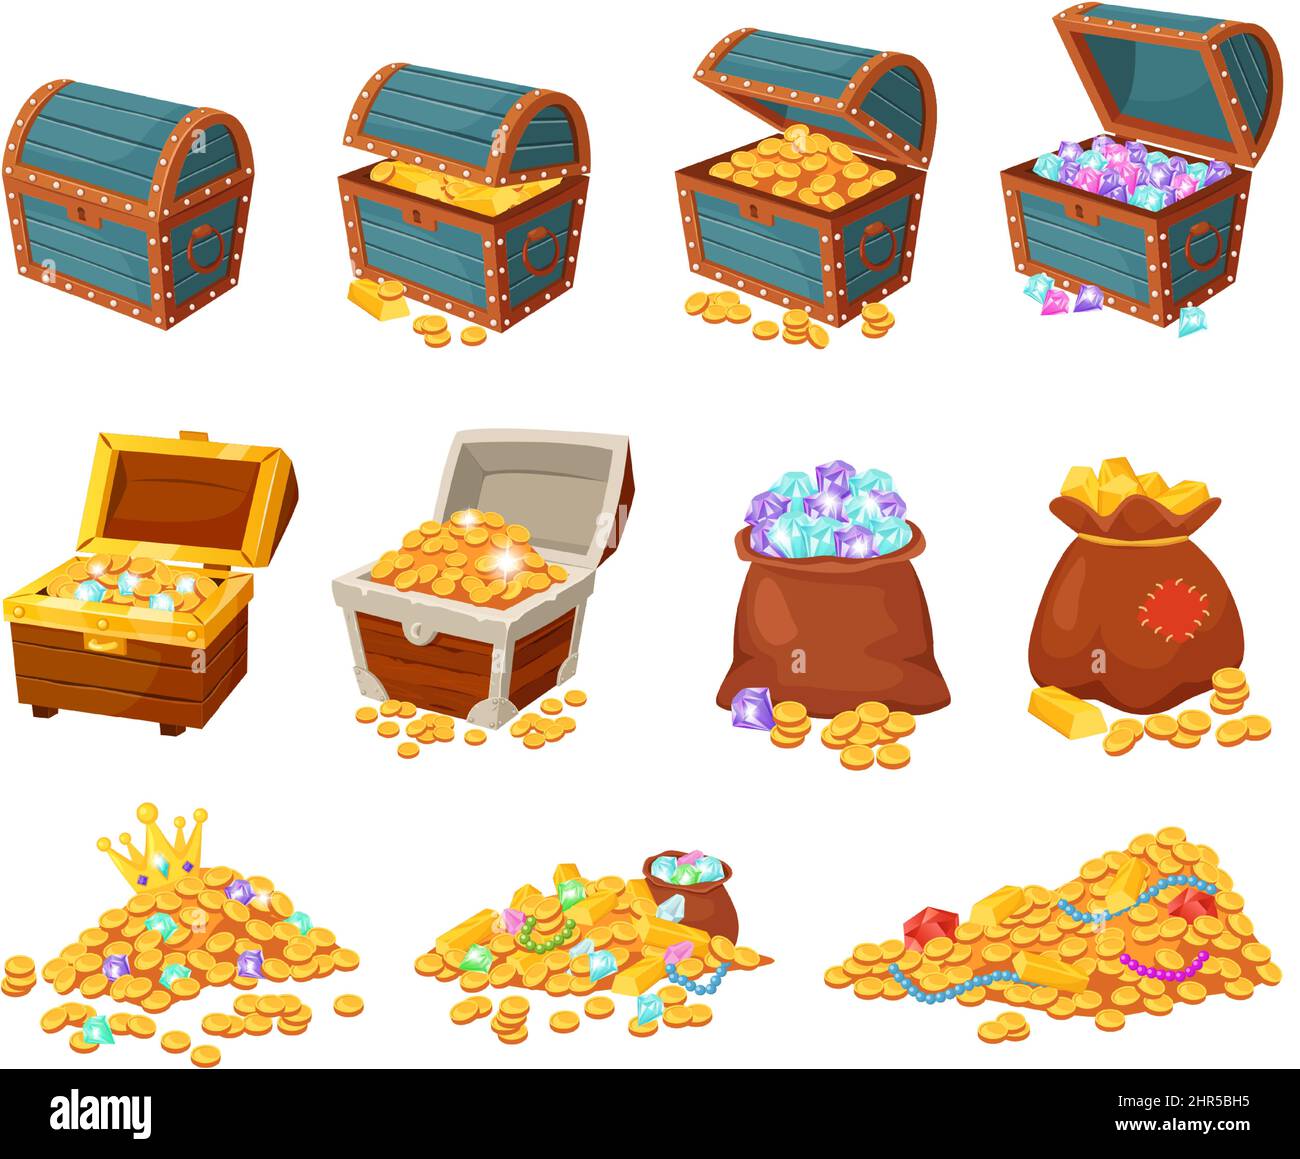 Cartoon treasure chests, piles of gold and jewels, pirate treasures. Bag with diamonds, open wooden chest with coins and gems vector set. Illustration Stock Vector